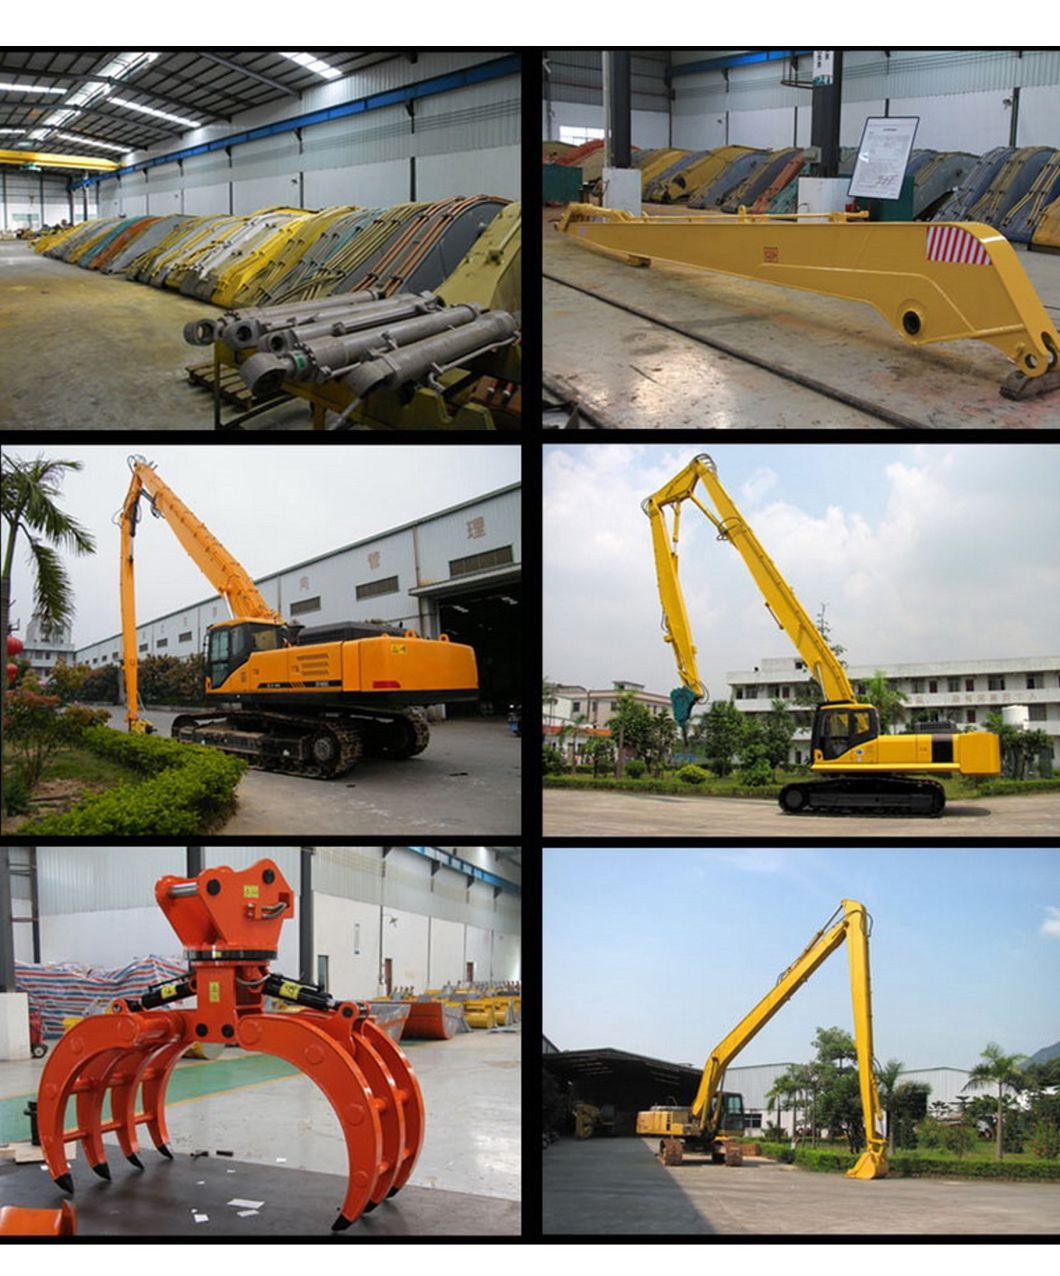 Customize High Quality Excavator Shake Extension Jib Standard Arm Long Reach Boom for Excavator